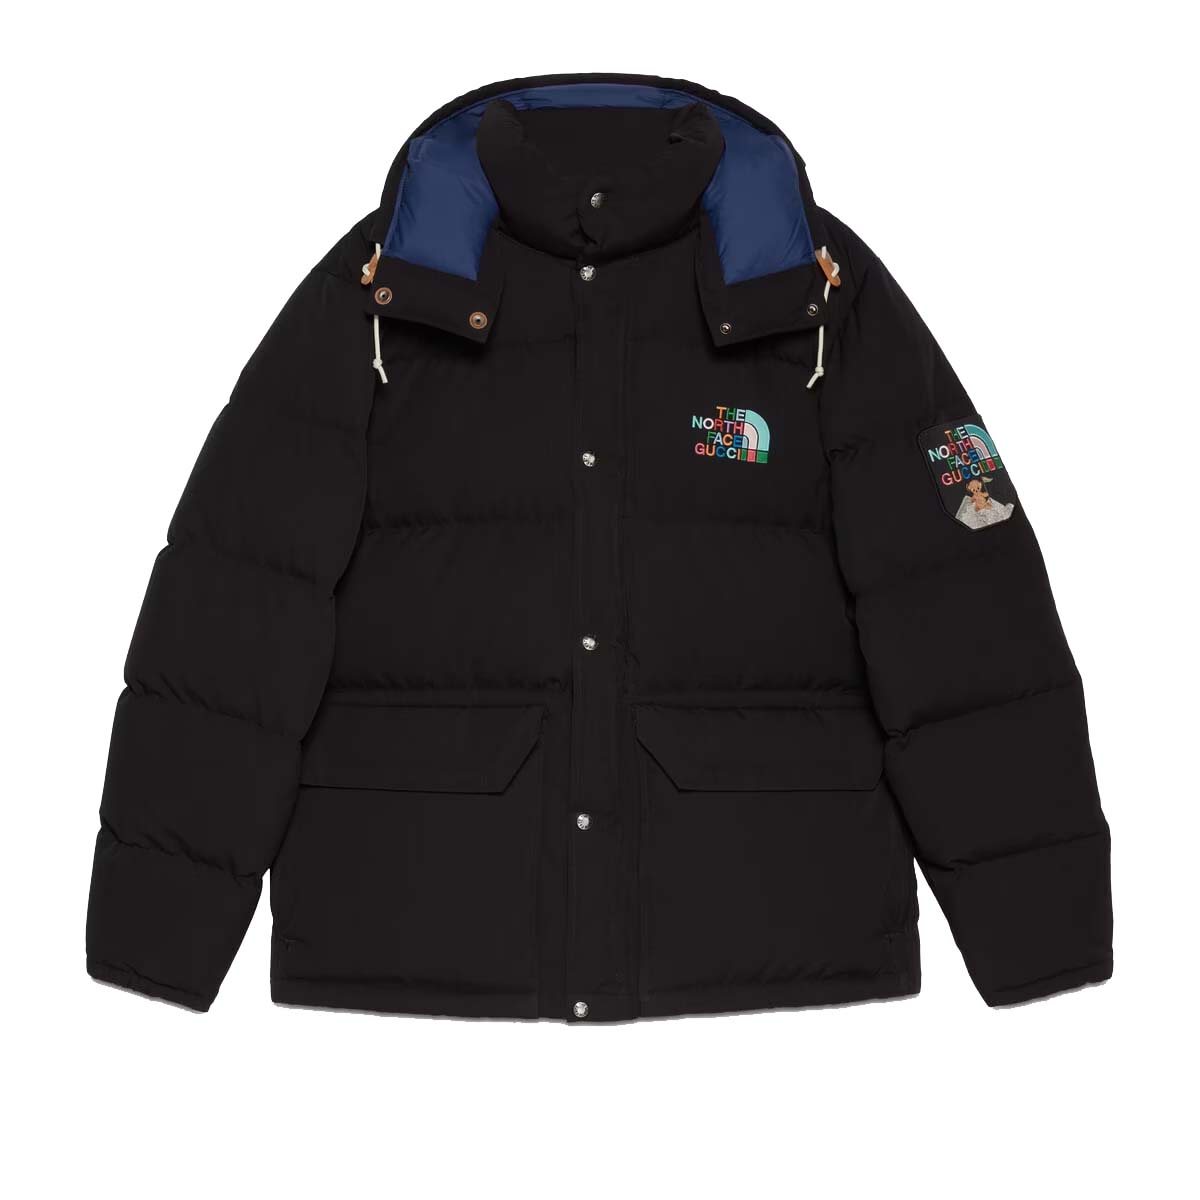 Gucci x The North Face Down Jacket Blue/Brown Men's - FW21 - US